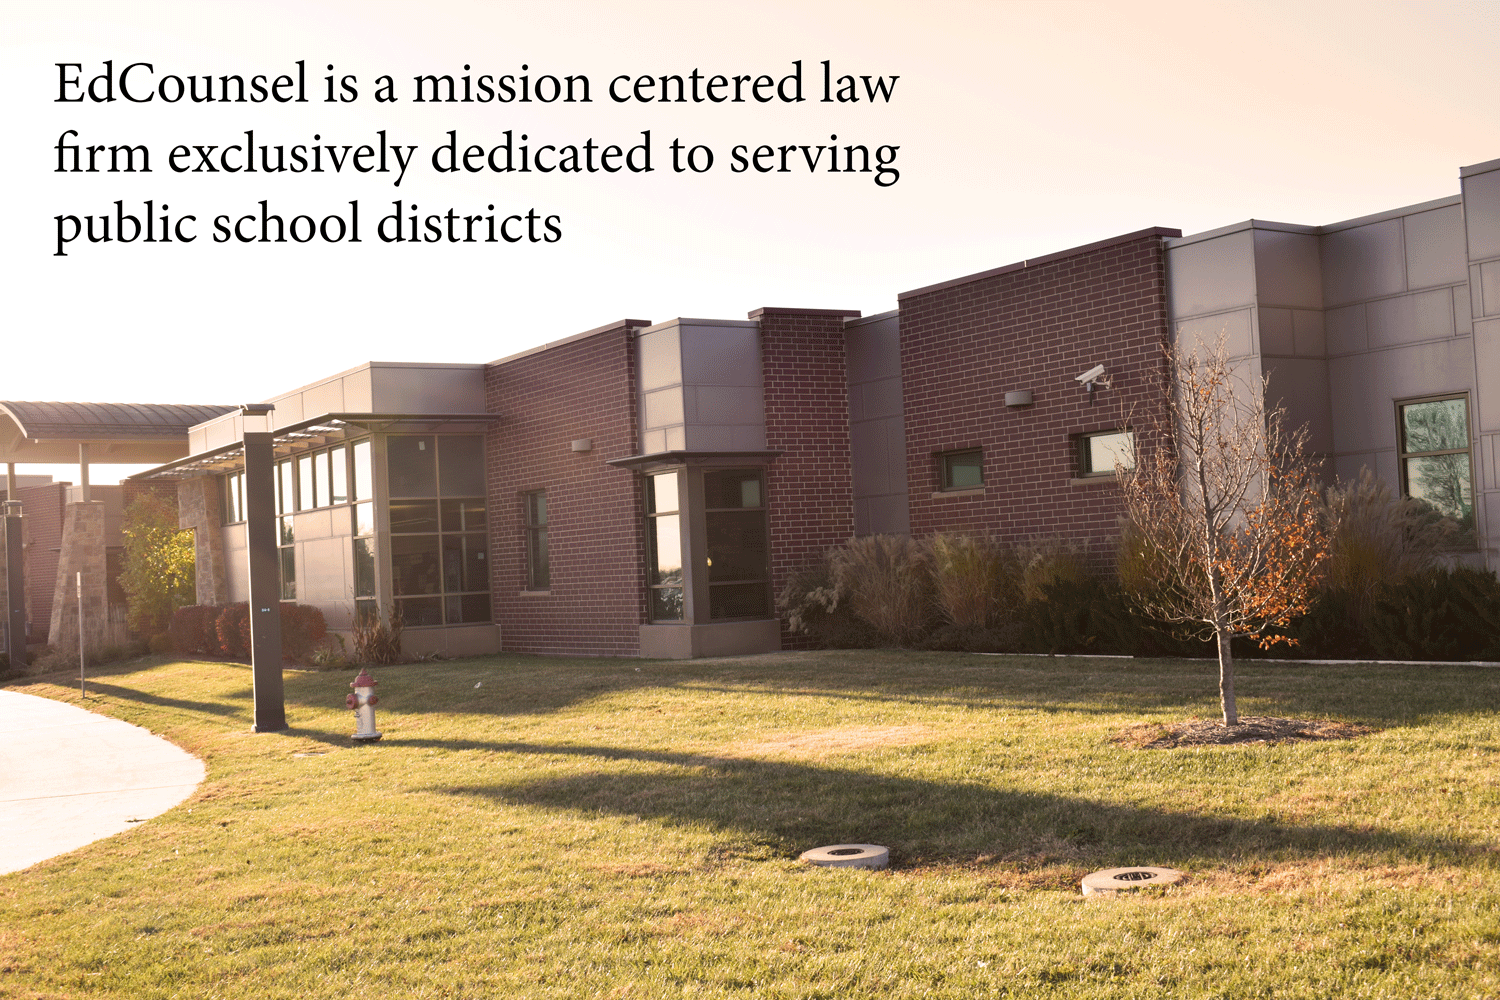 EdCounsel | Mission Centered Law Firm Dedicated to Public Schools!